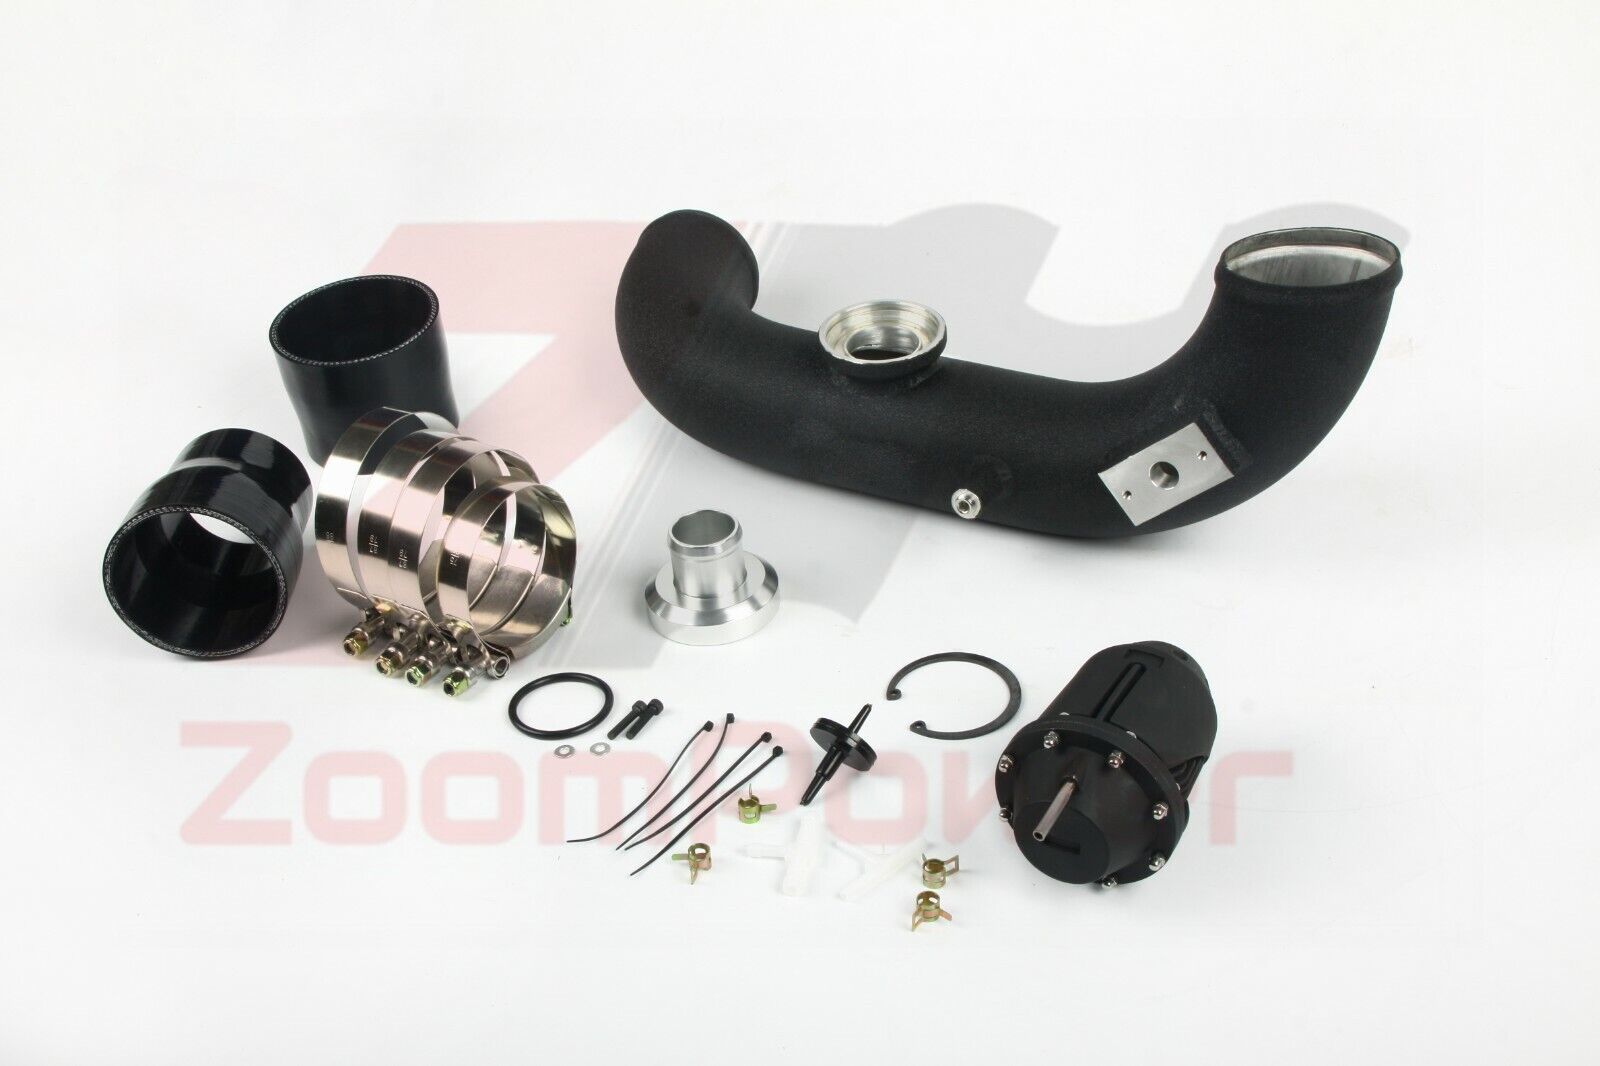 BMW CHARGE PIPE KIT w/ SSQV BLOW OFF for N54 E82 E91 E93 135 335iX 335Xi N54